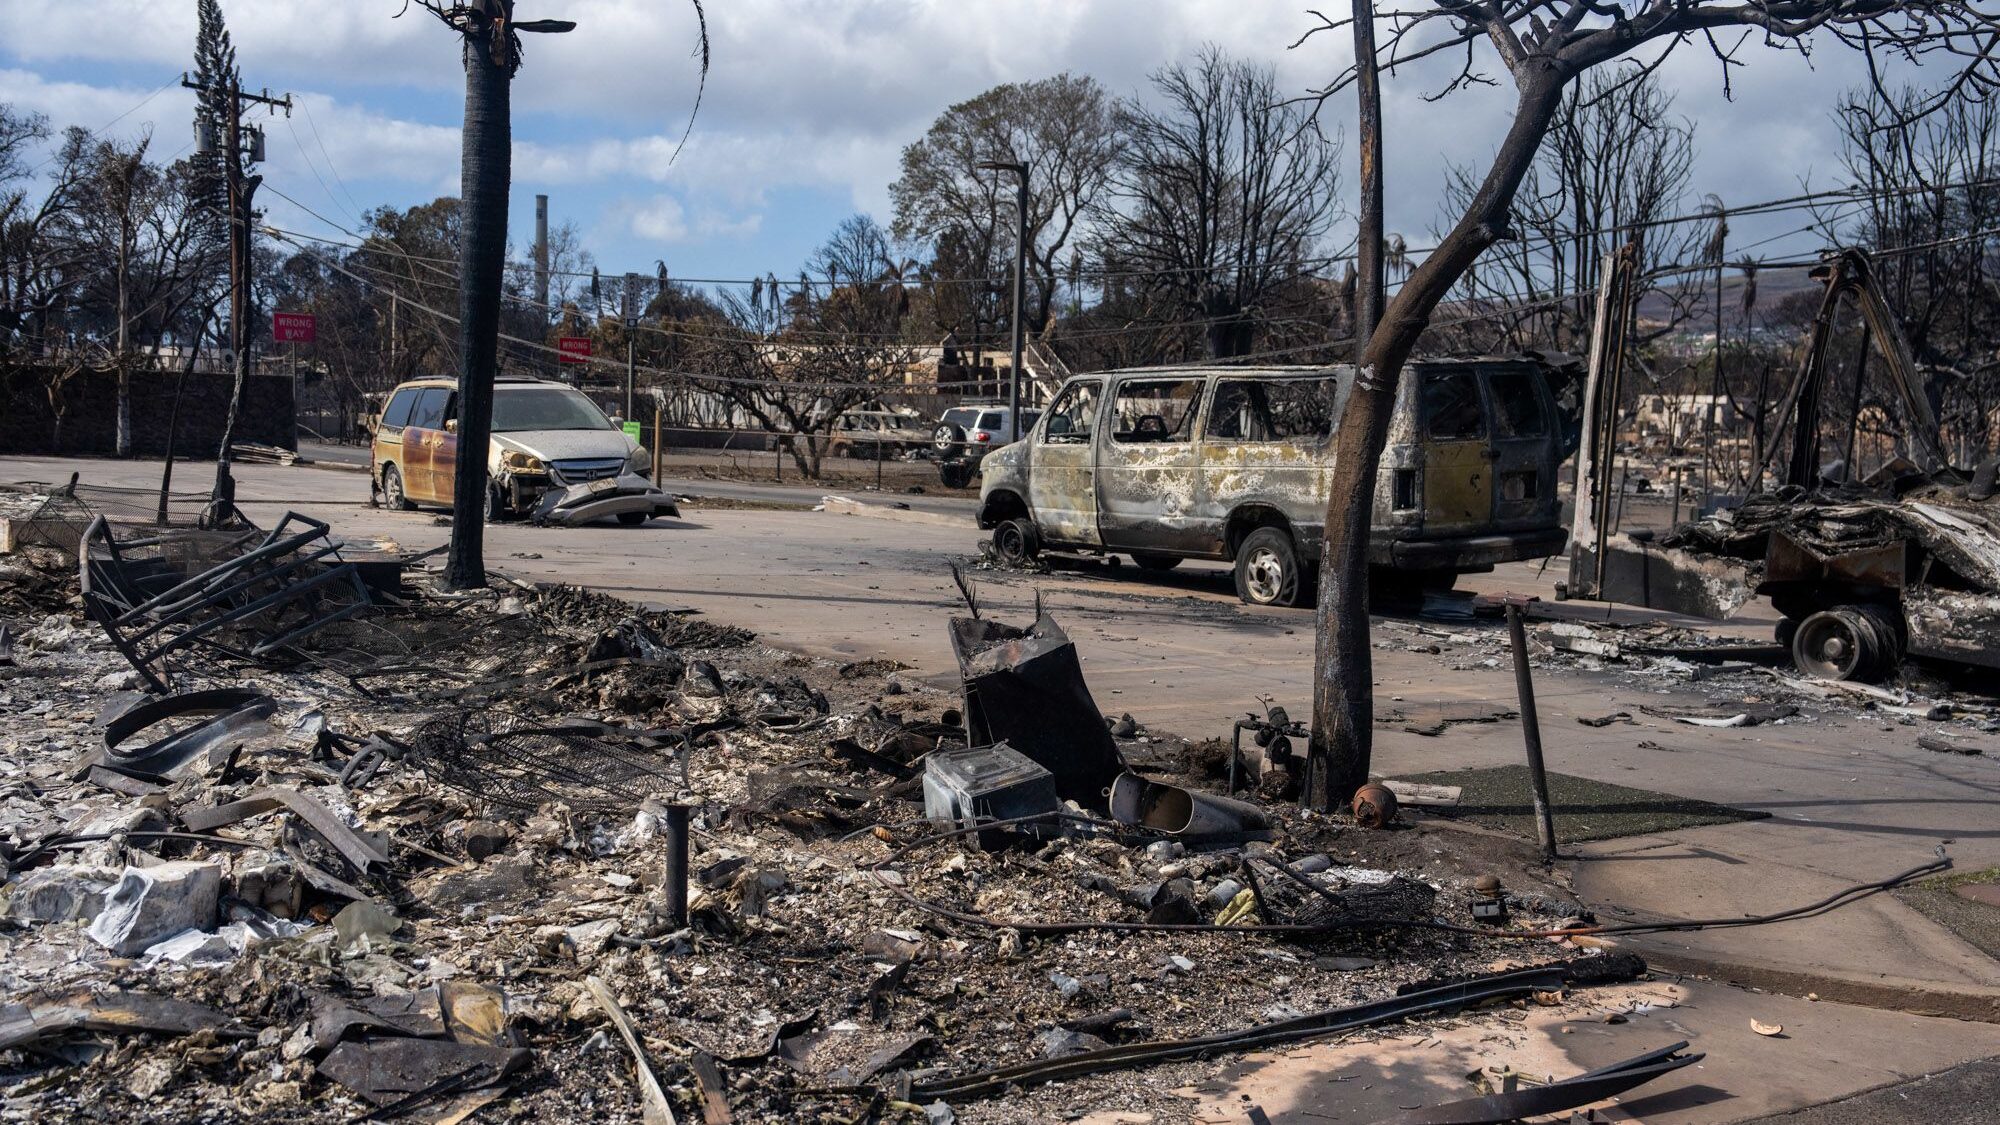 Wildfires in Maui have killed at least 55 people, displaced thousands and demolished many homes Bur...